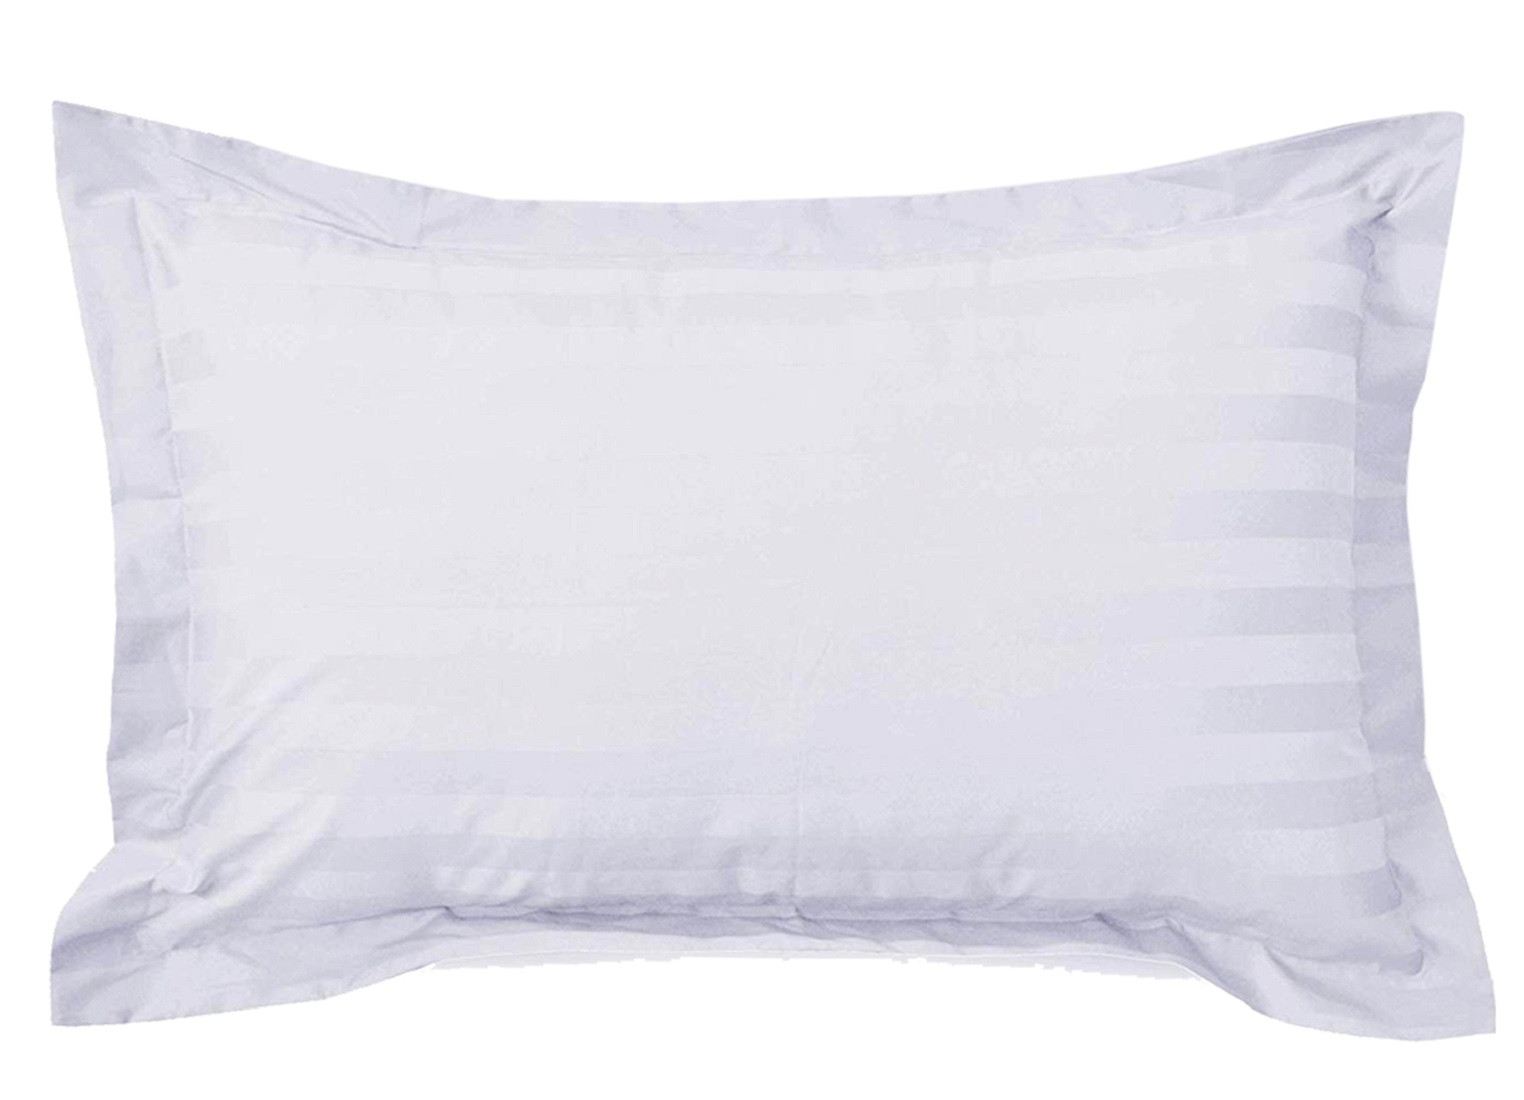 Kuber Industries Lining Design Breathable & Soft Cotton Pillow Cover/Protector/Case- 18x28 Inch,(White)-HS43KUBMART26779